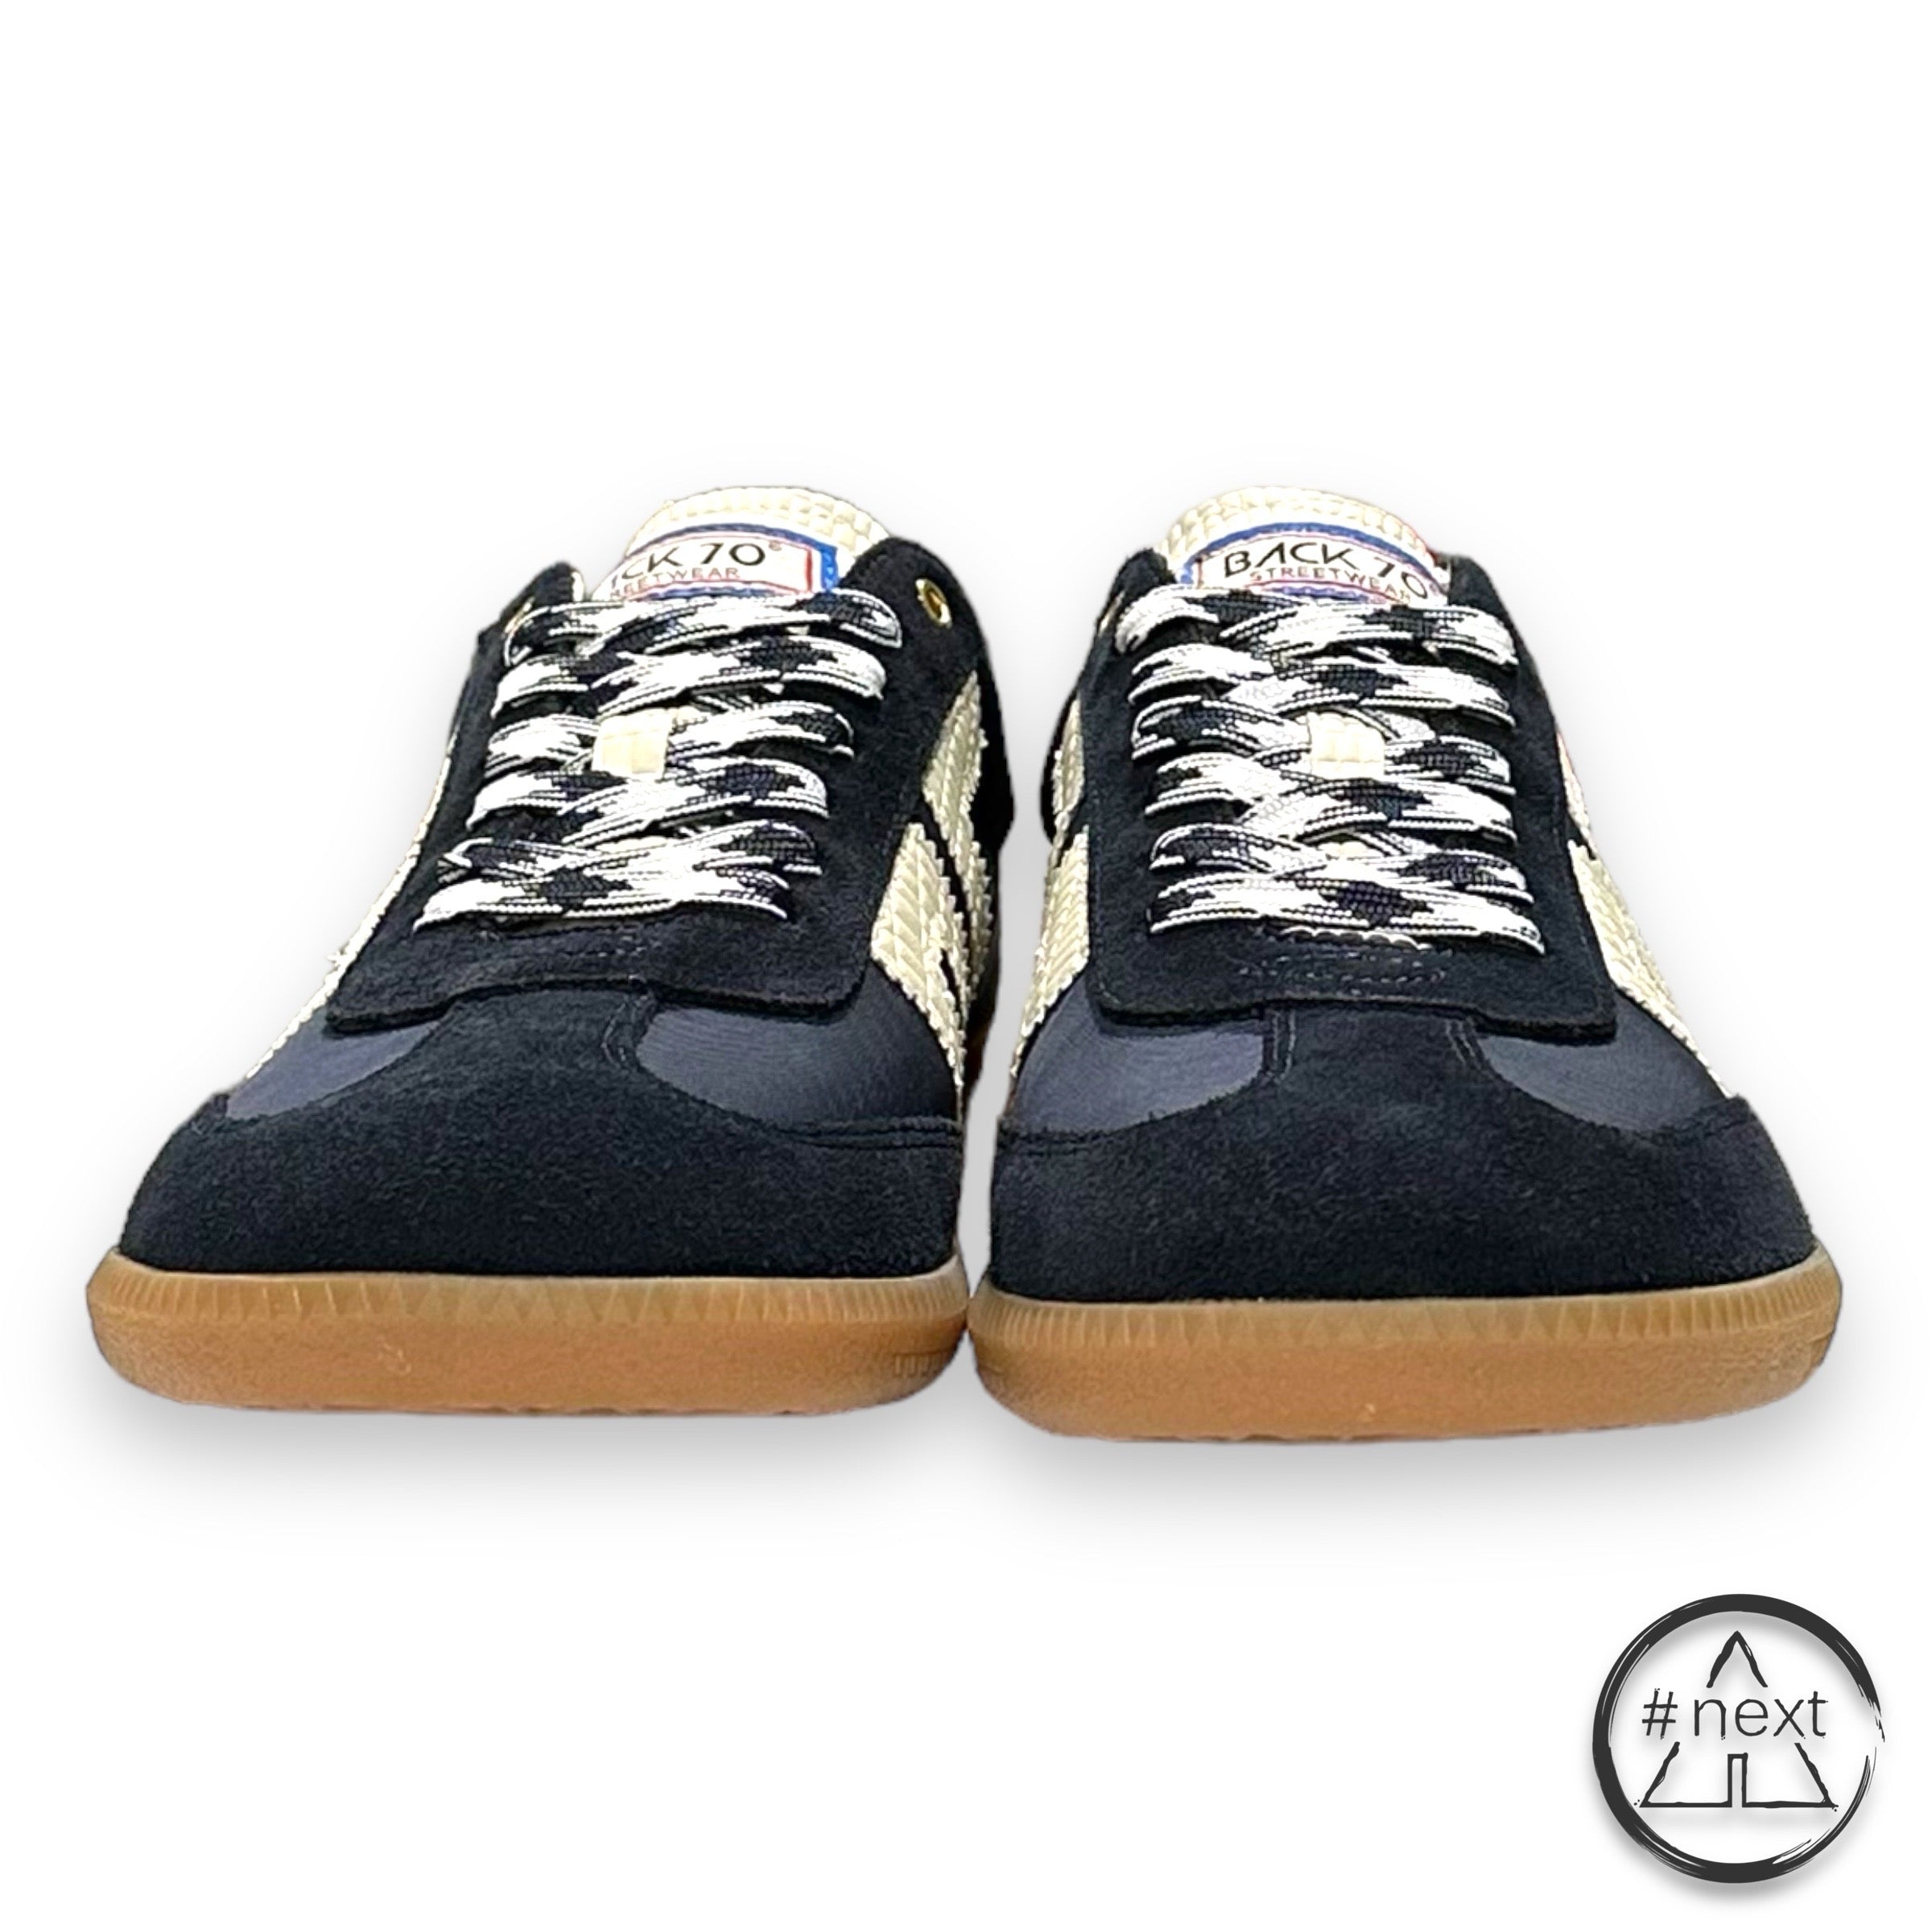 (#A) BACK70 - Sneakers GHOST - Blu navy, bianco - ANDY #NEXT